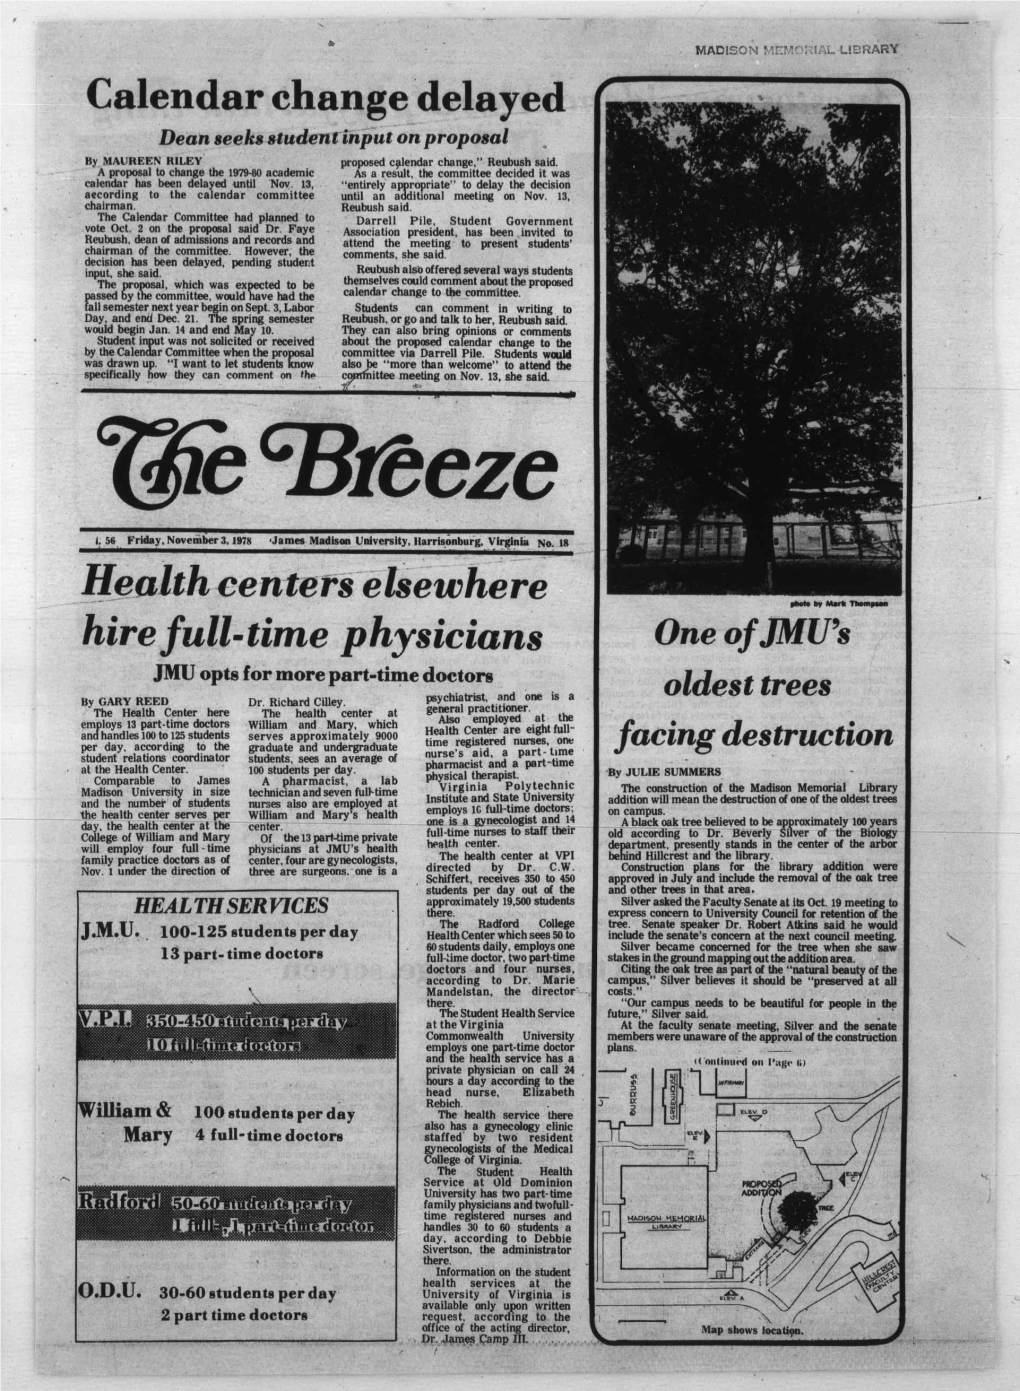 November 3, 1978 the BREEZE Anestos: Presidency Was a 'Playful Little Thing' By